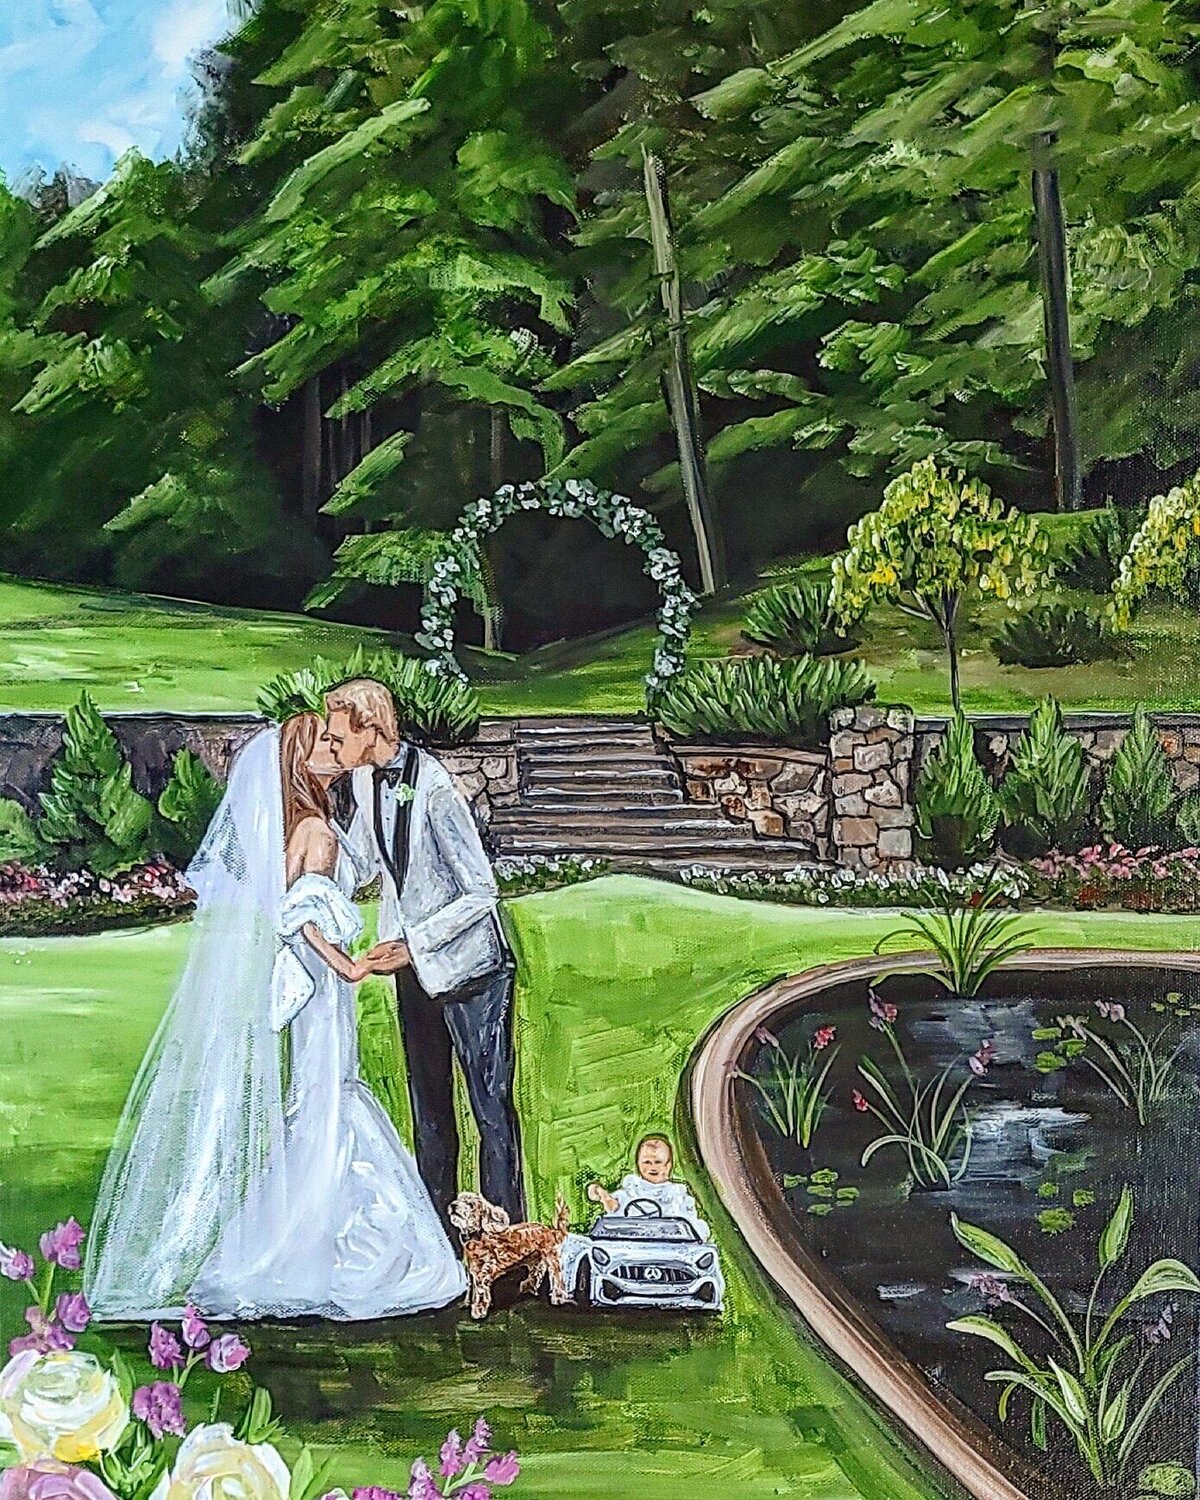 Strong Mansion wedding venue has the most gorgeous garden location for a wedding ceremony and wedding portraits!